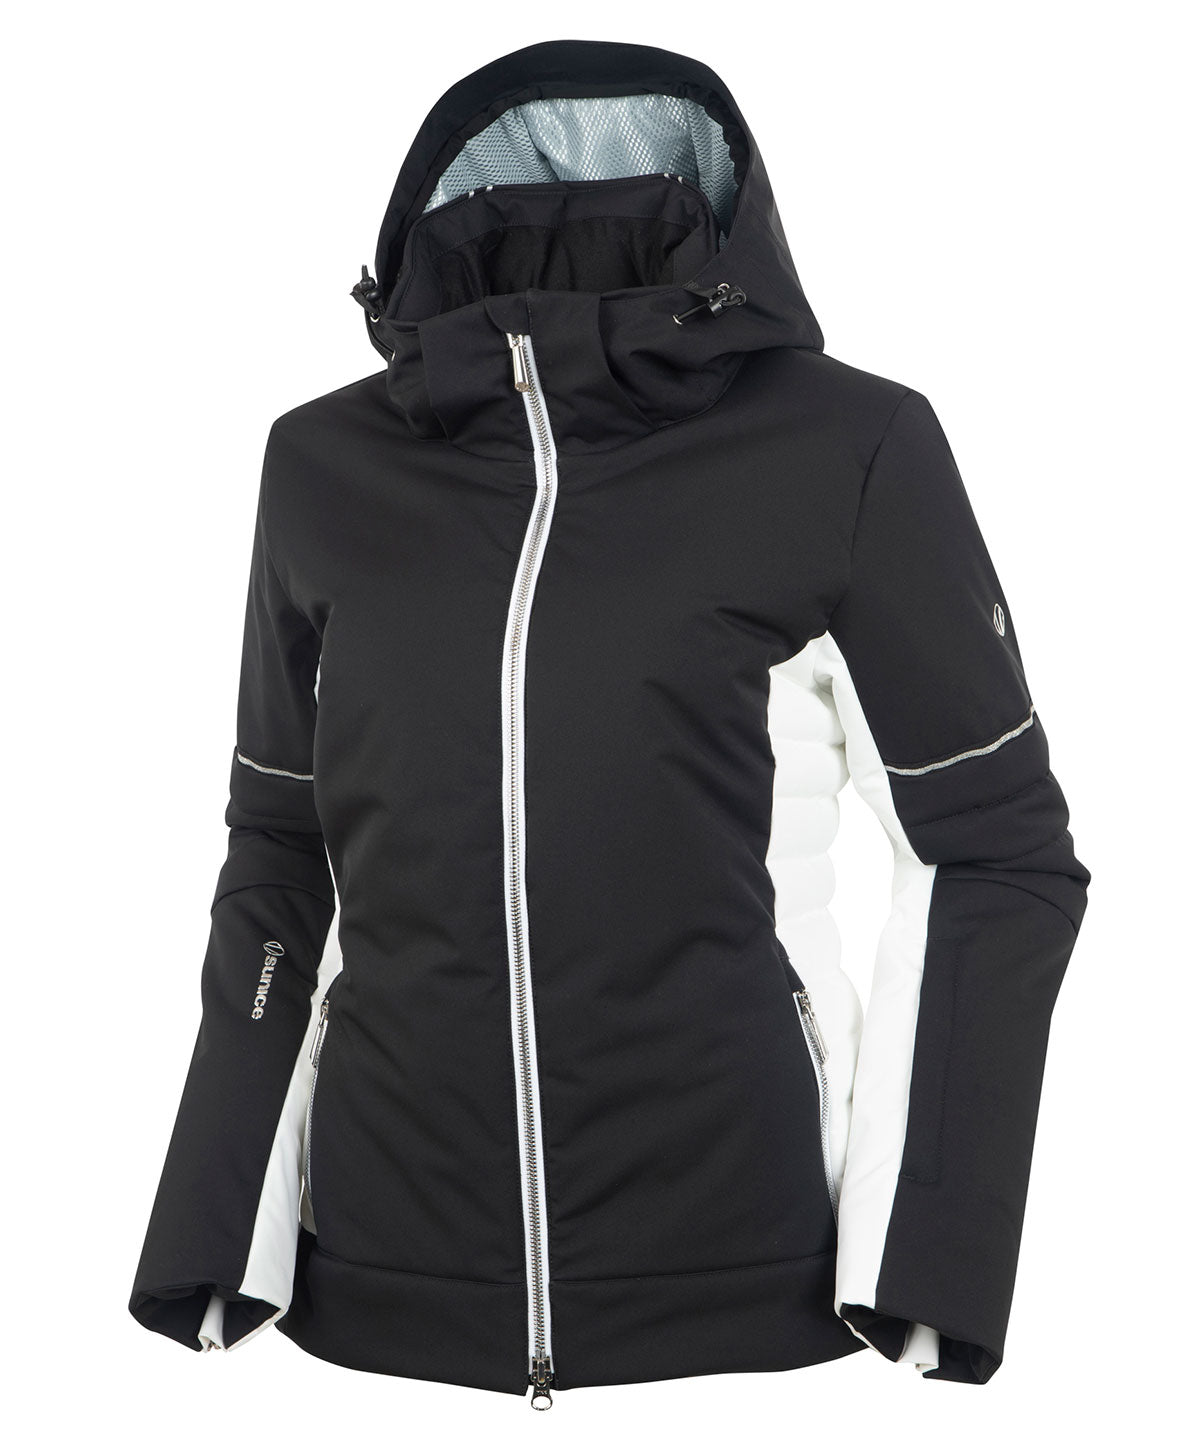 Women's Melissa Waterproof Stretch Jacket with Removable Hood